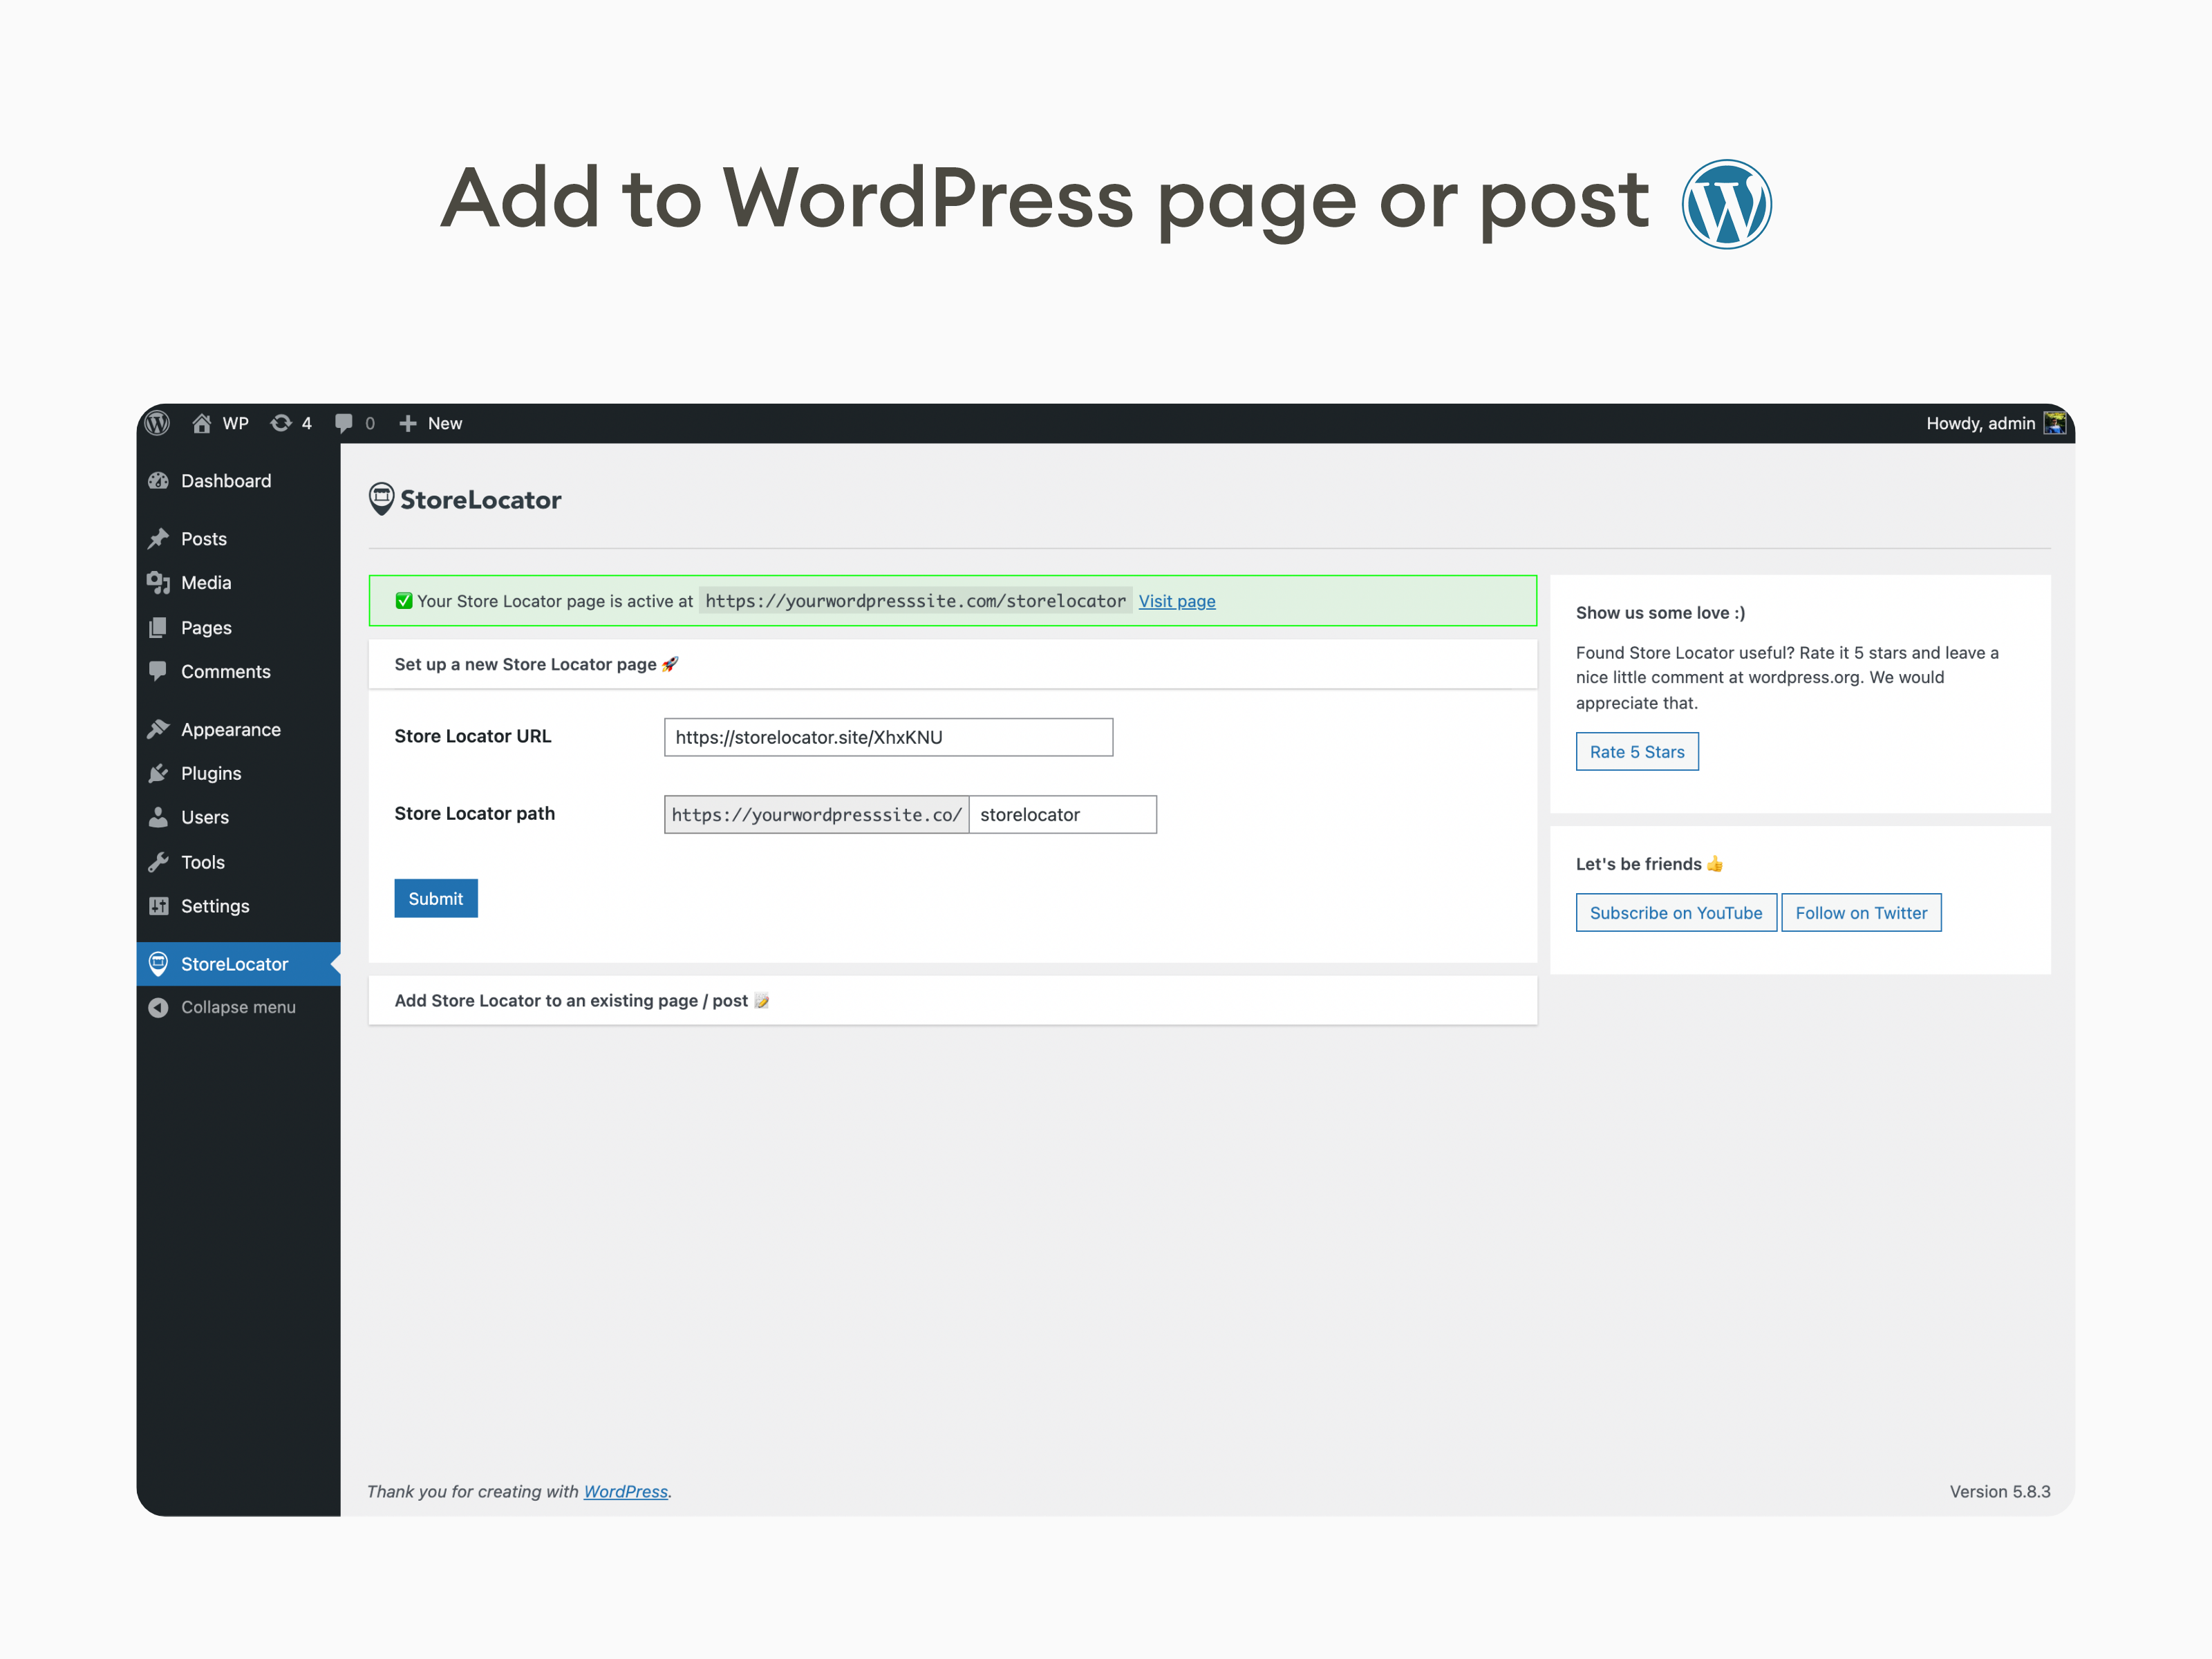 Add to WordPress page or post.